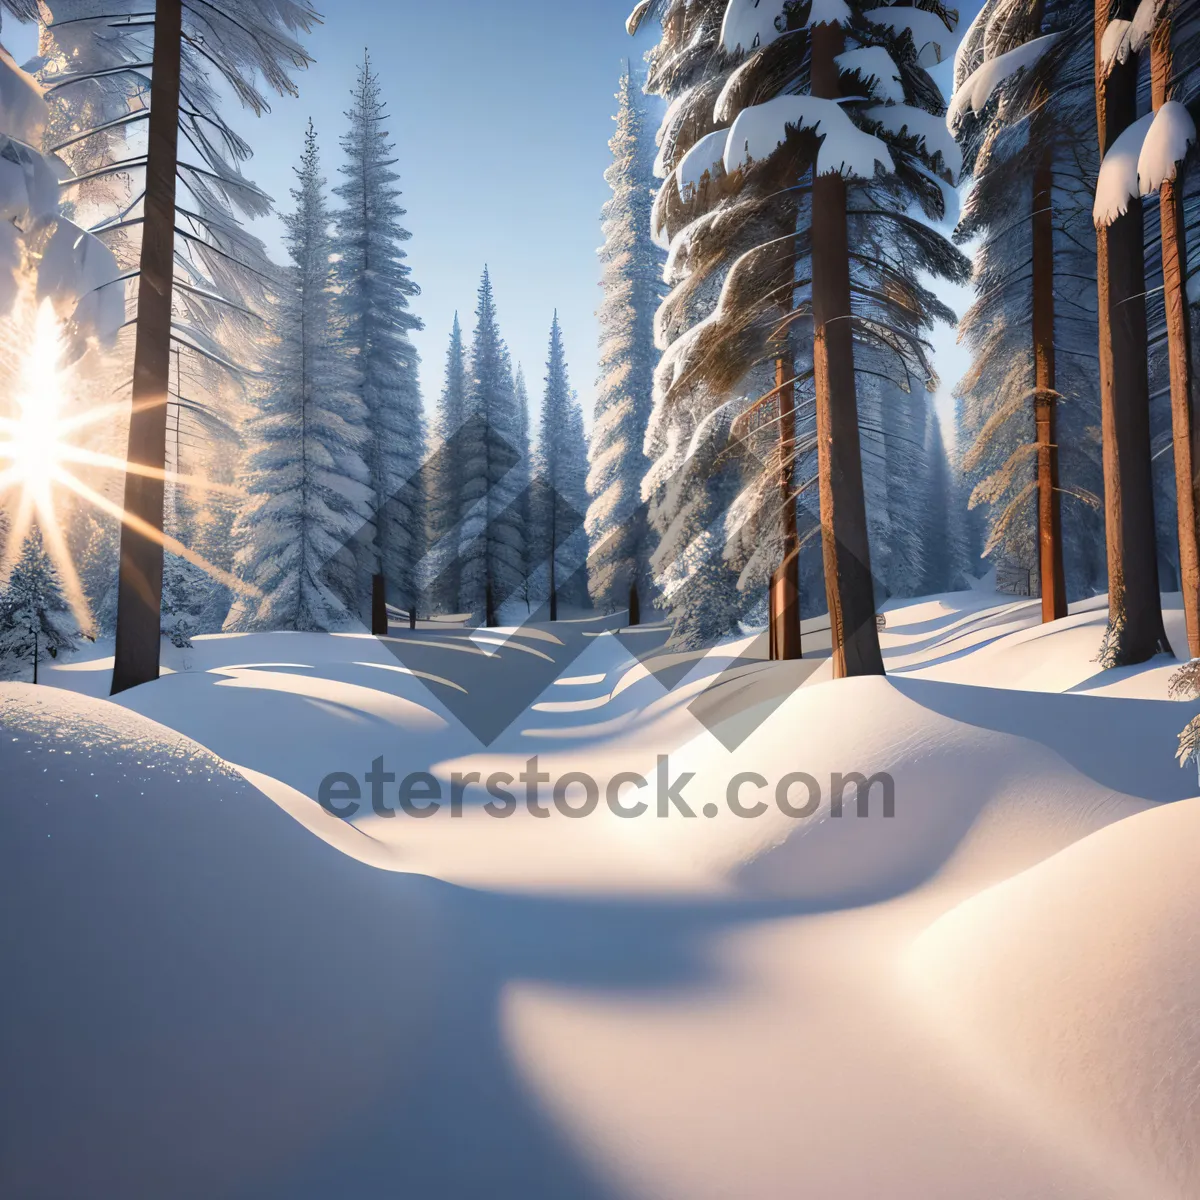 Picture of Majestic Winter Wonderland: Snowy Mountain Forest Scenery